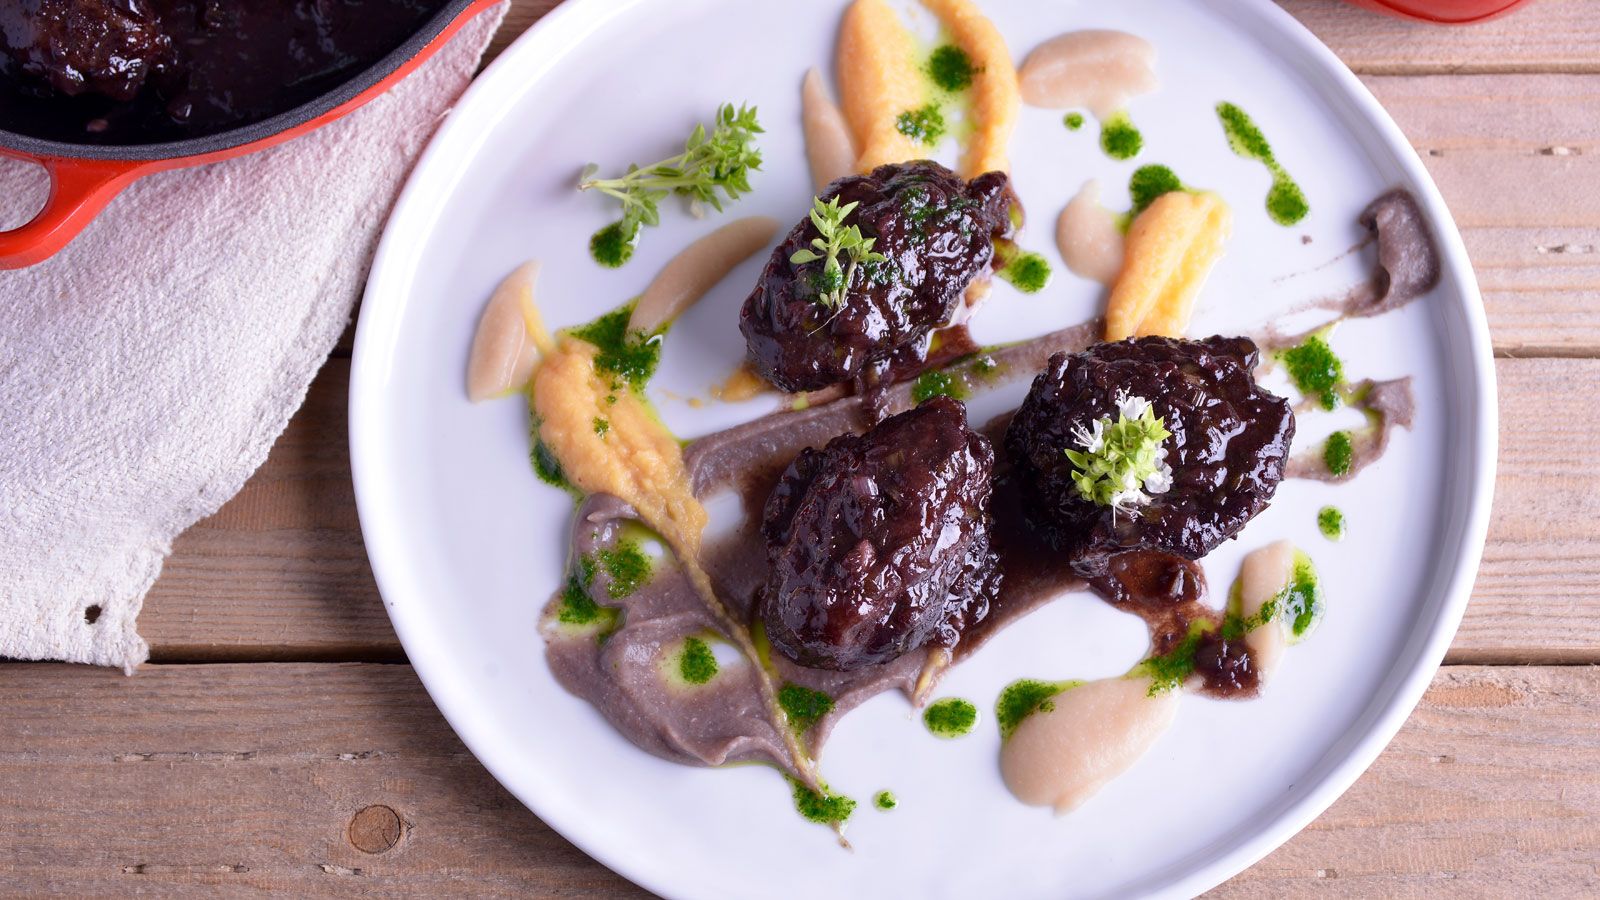 Order Some Takeout Meals and We’ll Reveal If You’re Weird or Not Weird Braised ox cheeks1